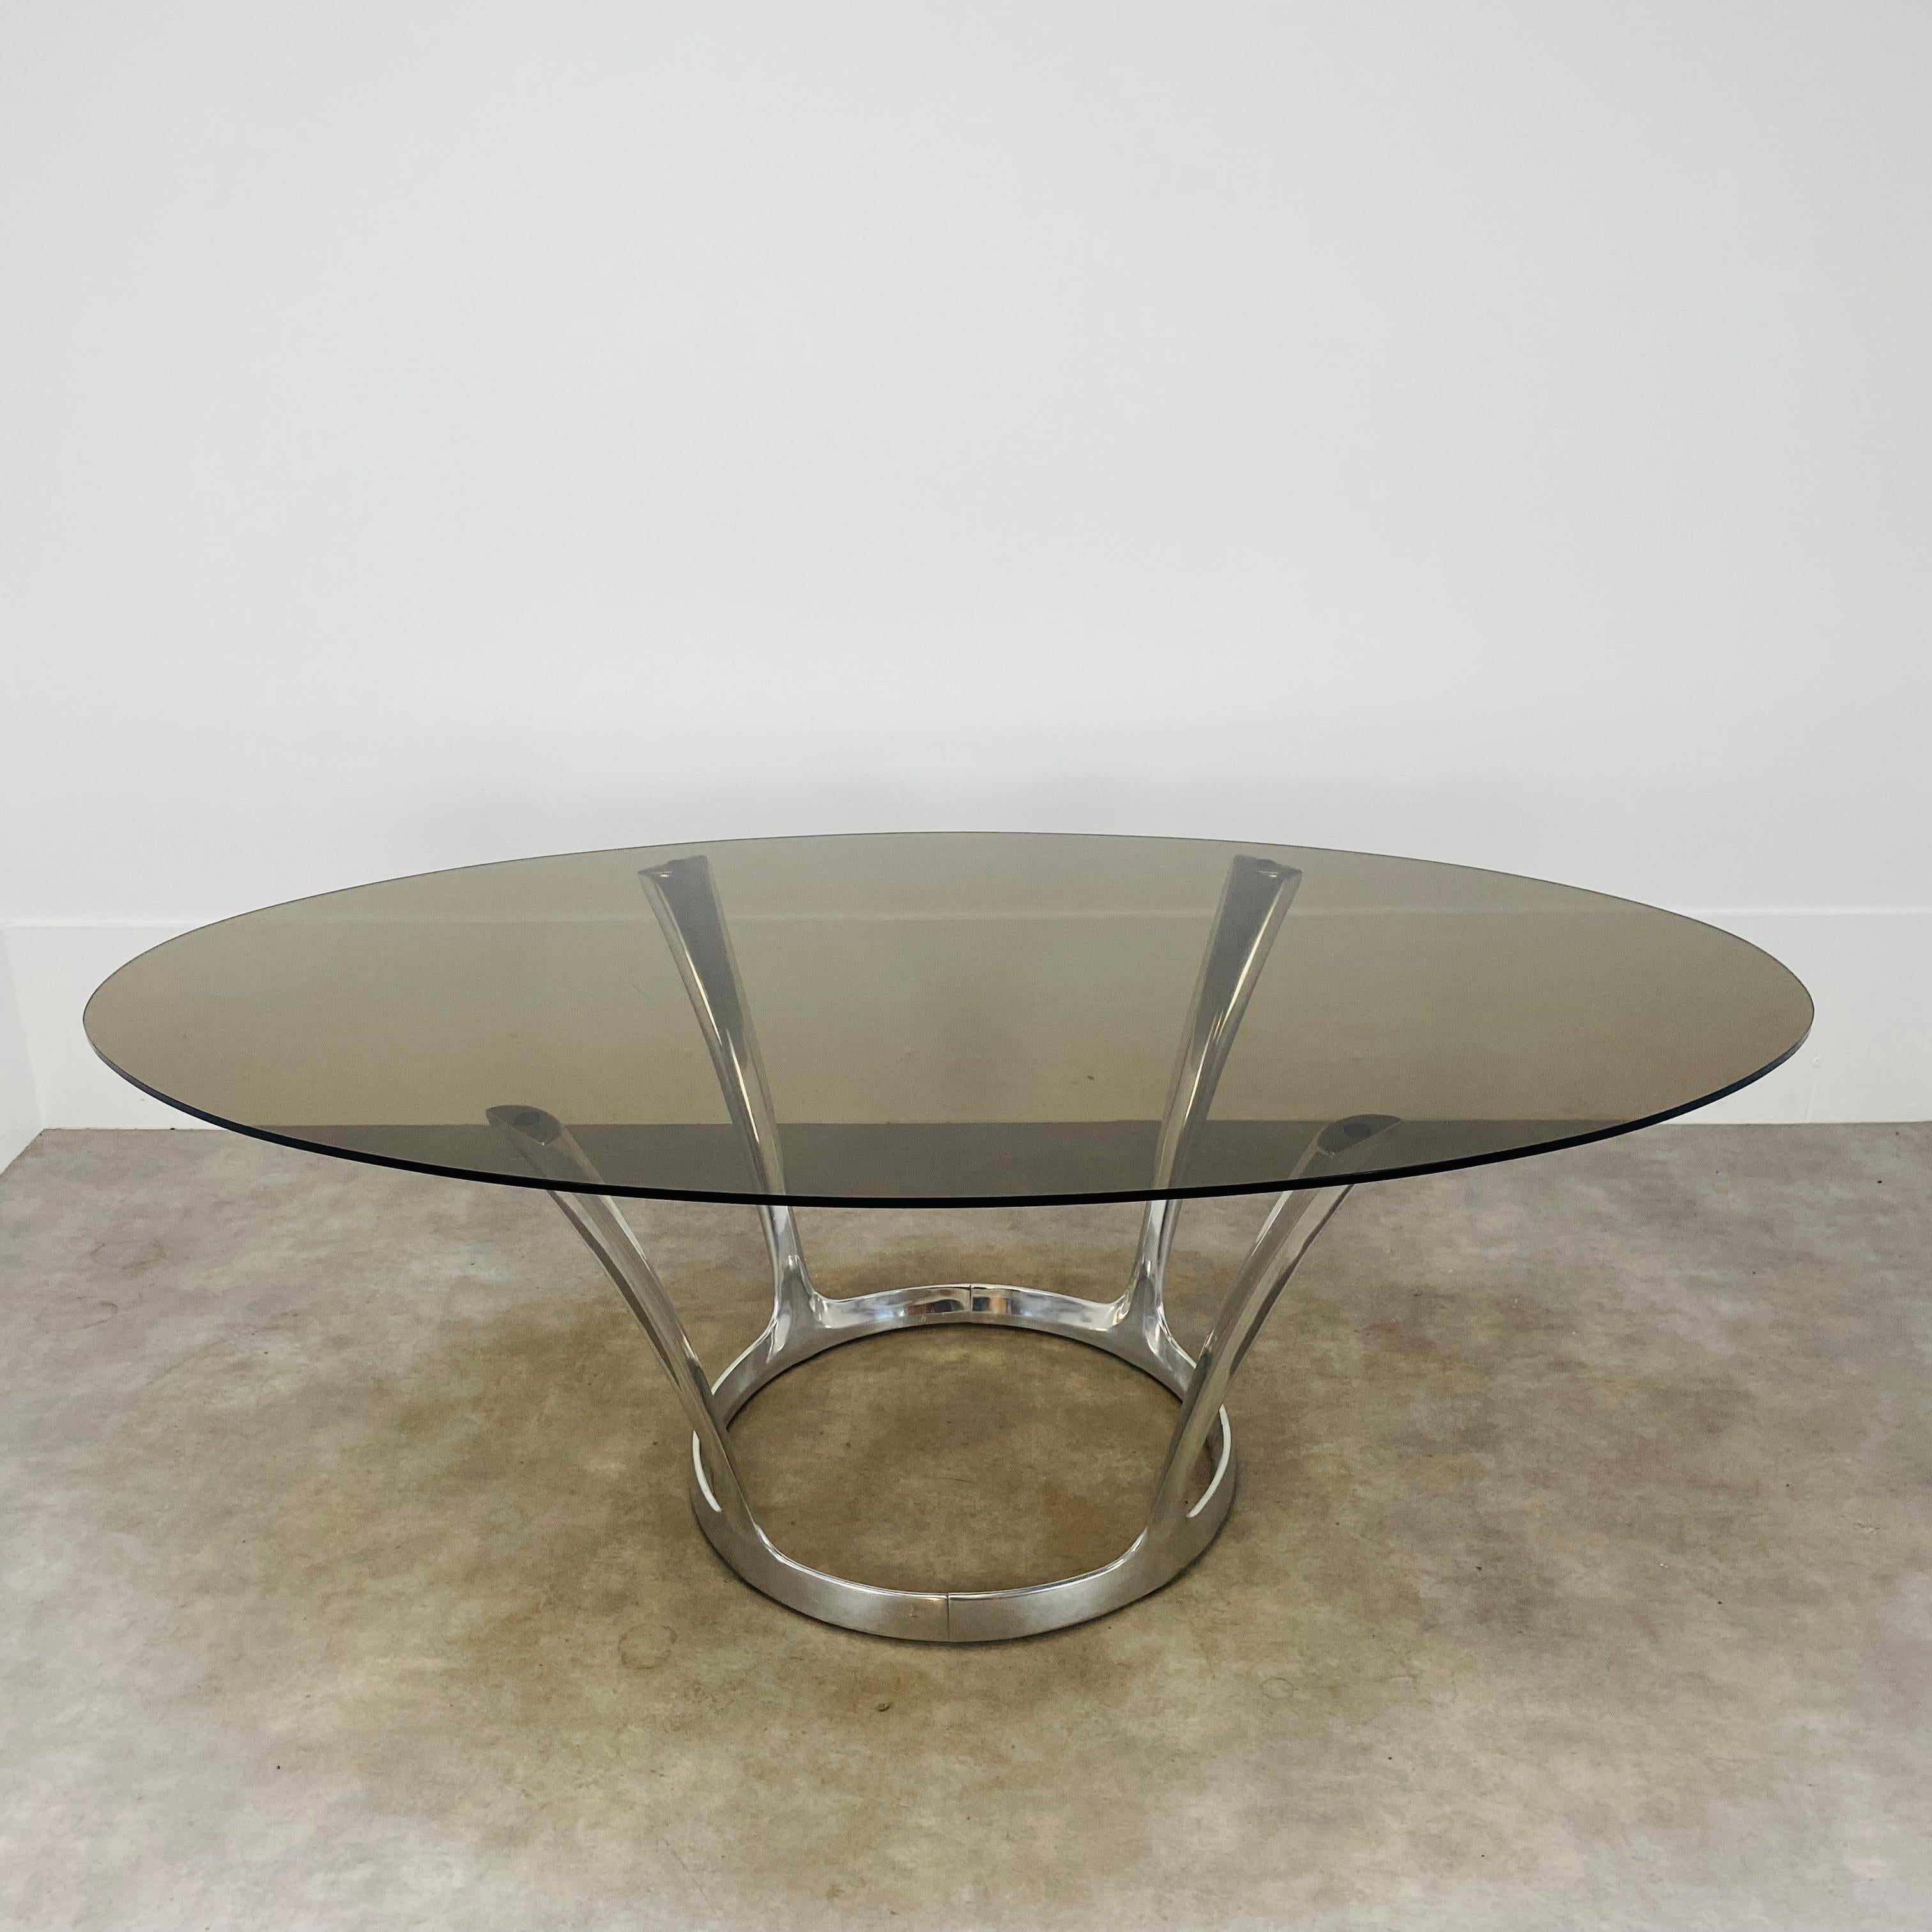 Oval dining room table by french designer Michel Charron, typical design from the seventies. 
Very nice condition, rare wear marks on the glass and aluminium table base. No splinter on the glass. Table base is dismountable. 